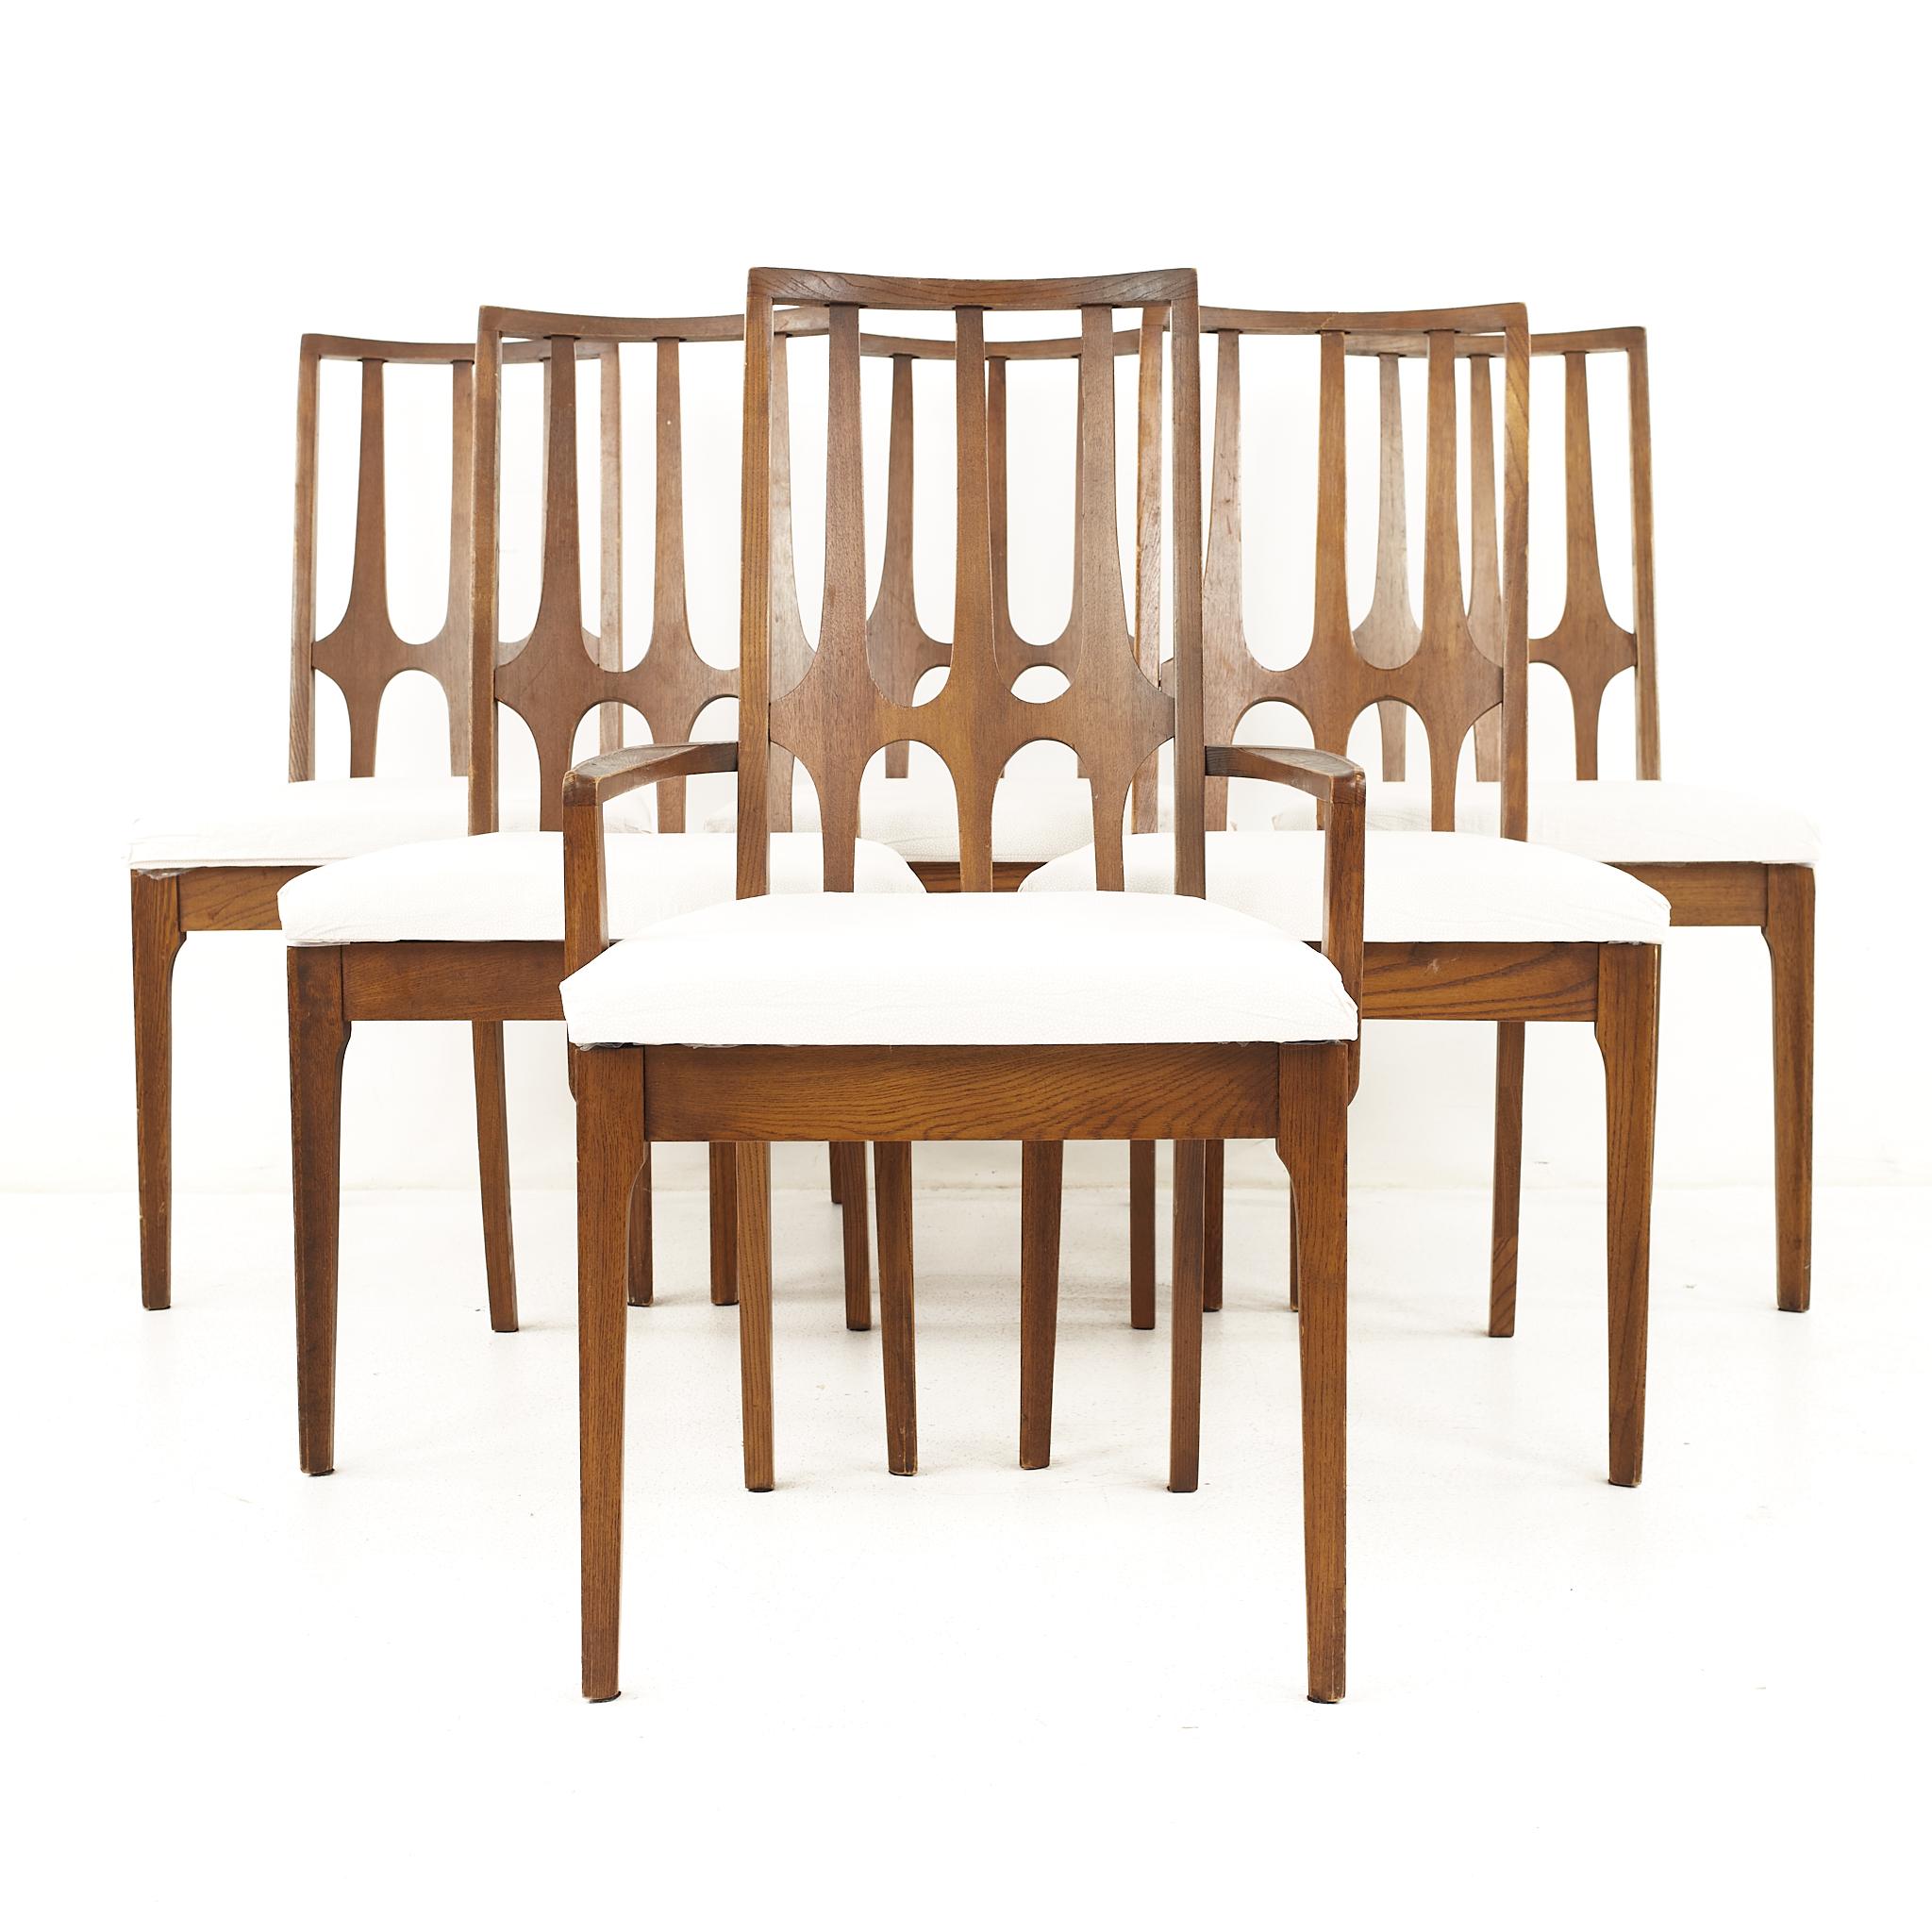 Broyhill Brasilia mid century dining chairs - Set of 5

The captains' chair measures: 21.25 wide x 18 deep x 38 high, with a seat height of 19 inches and arm height of 23.75 inches 
The side chairs measures: 21.25 wide x 18 deep x 38 high, with a